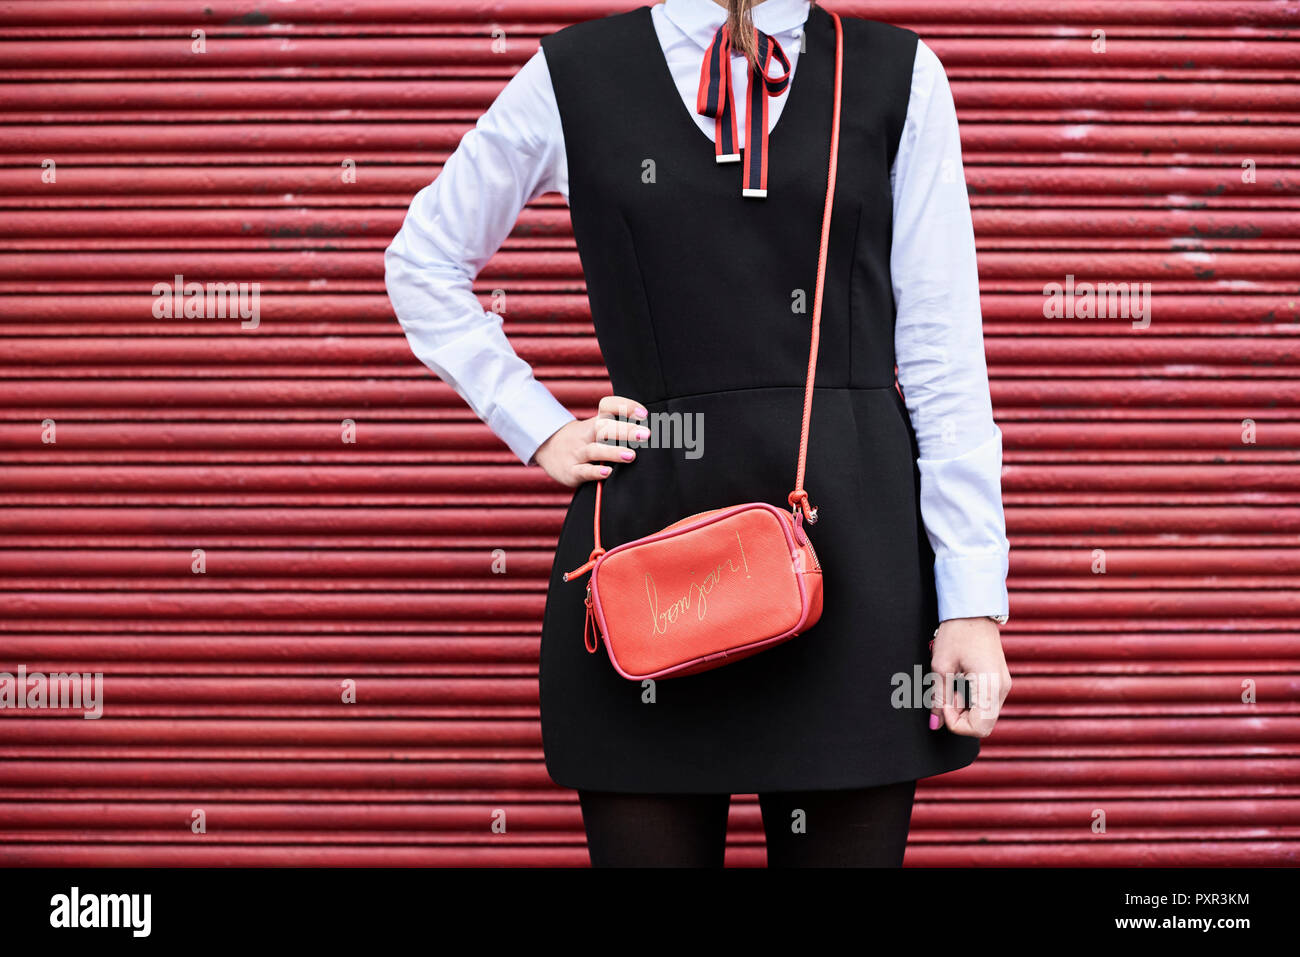 Fashionable woman with red handbag wearing black dress standing in front of red roller shutter Stock Photo